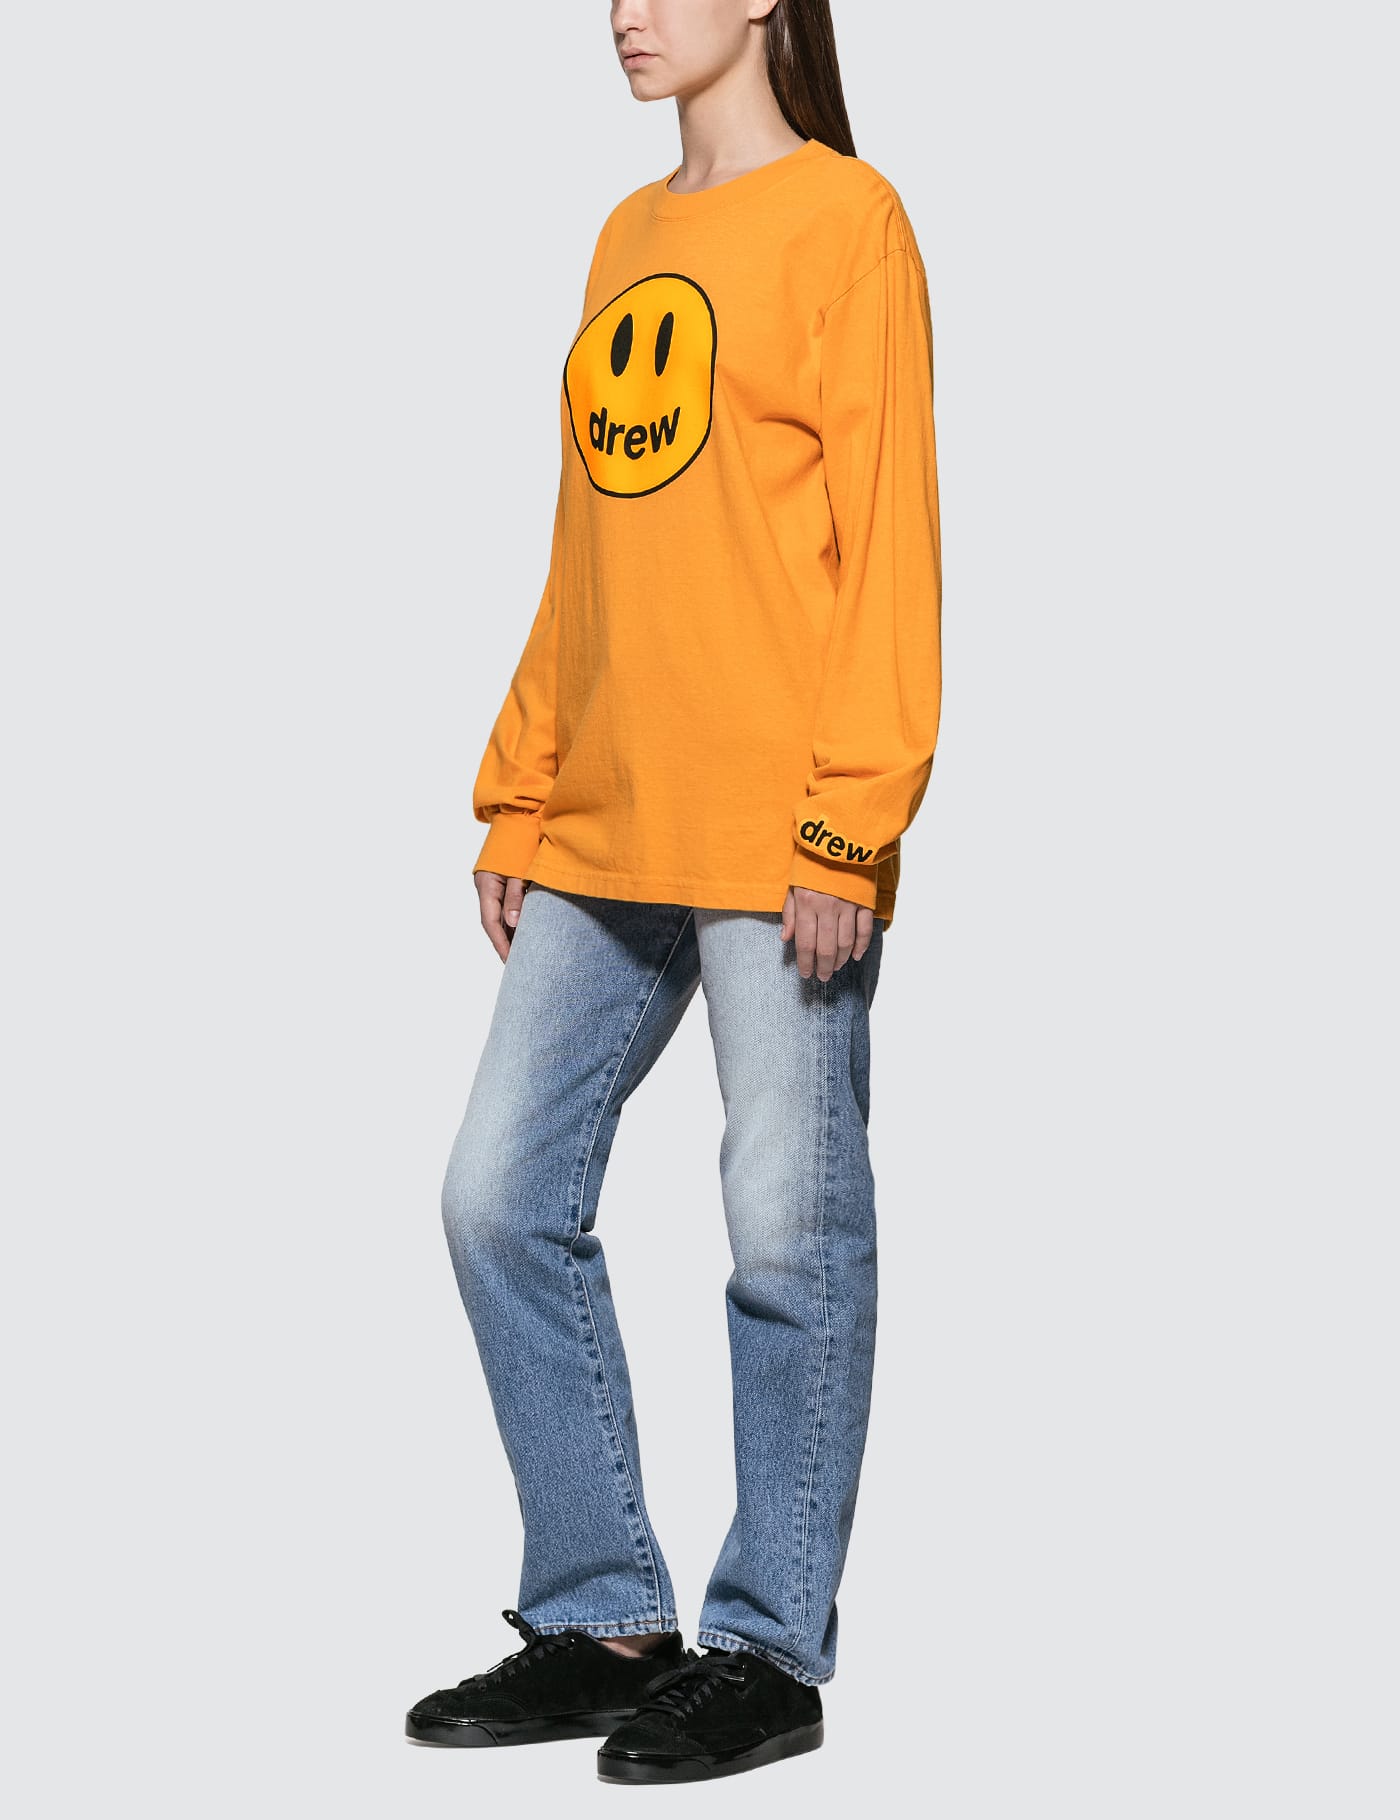 Drew House - Mascot Long Sleeve T-shirt | HBX - Globally Curated 